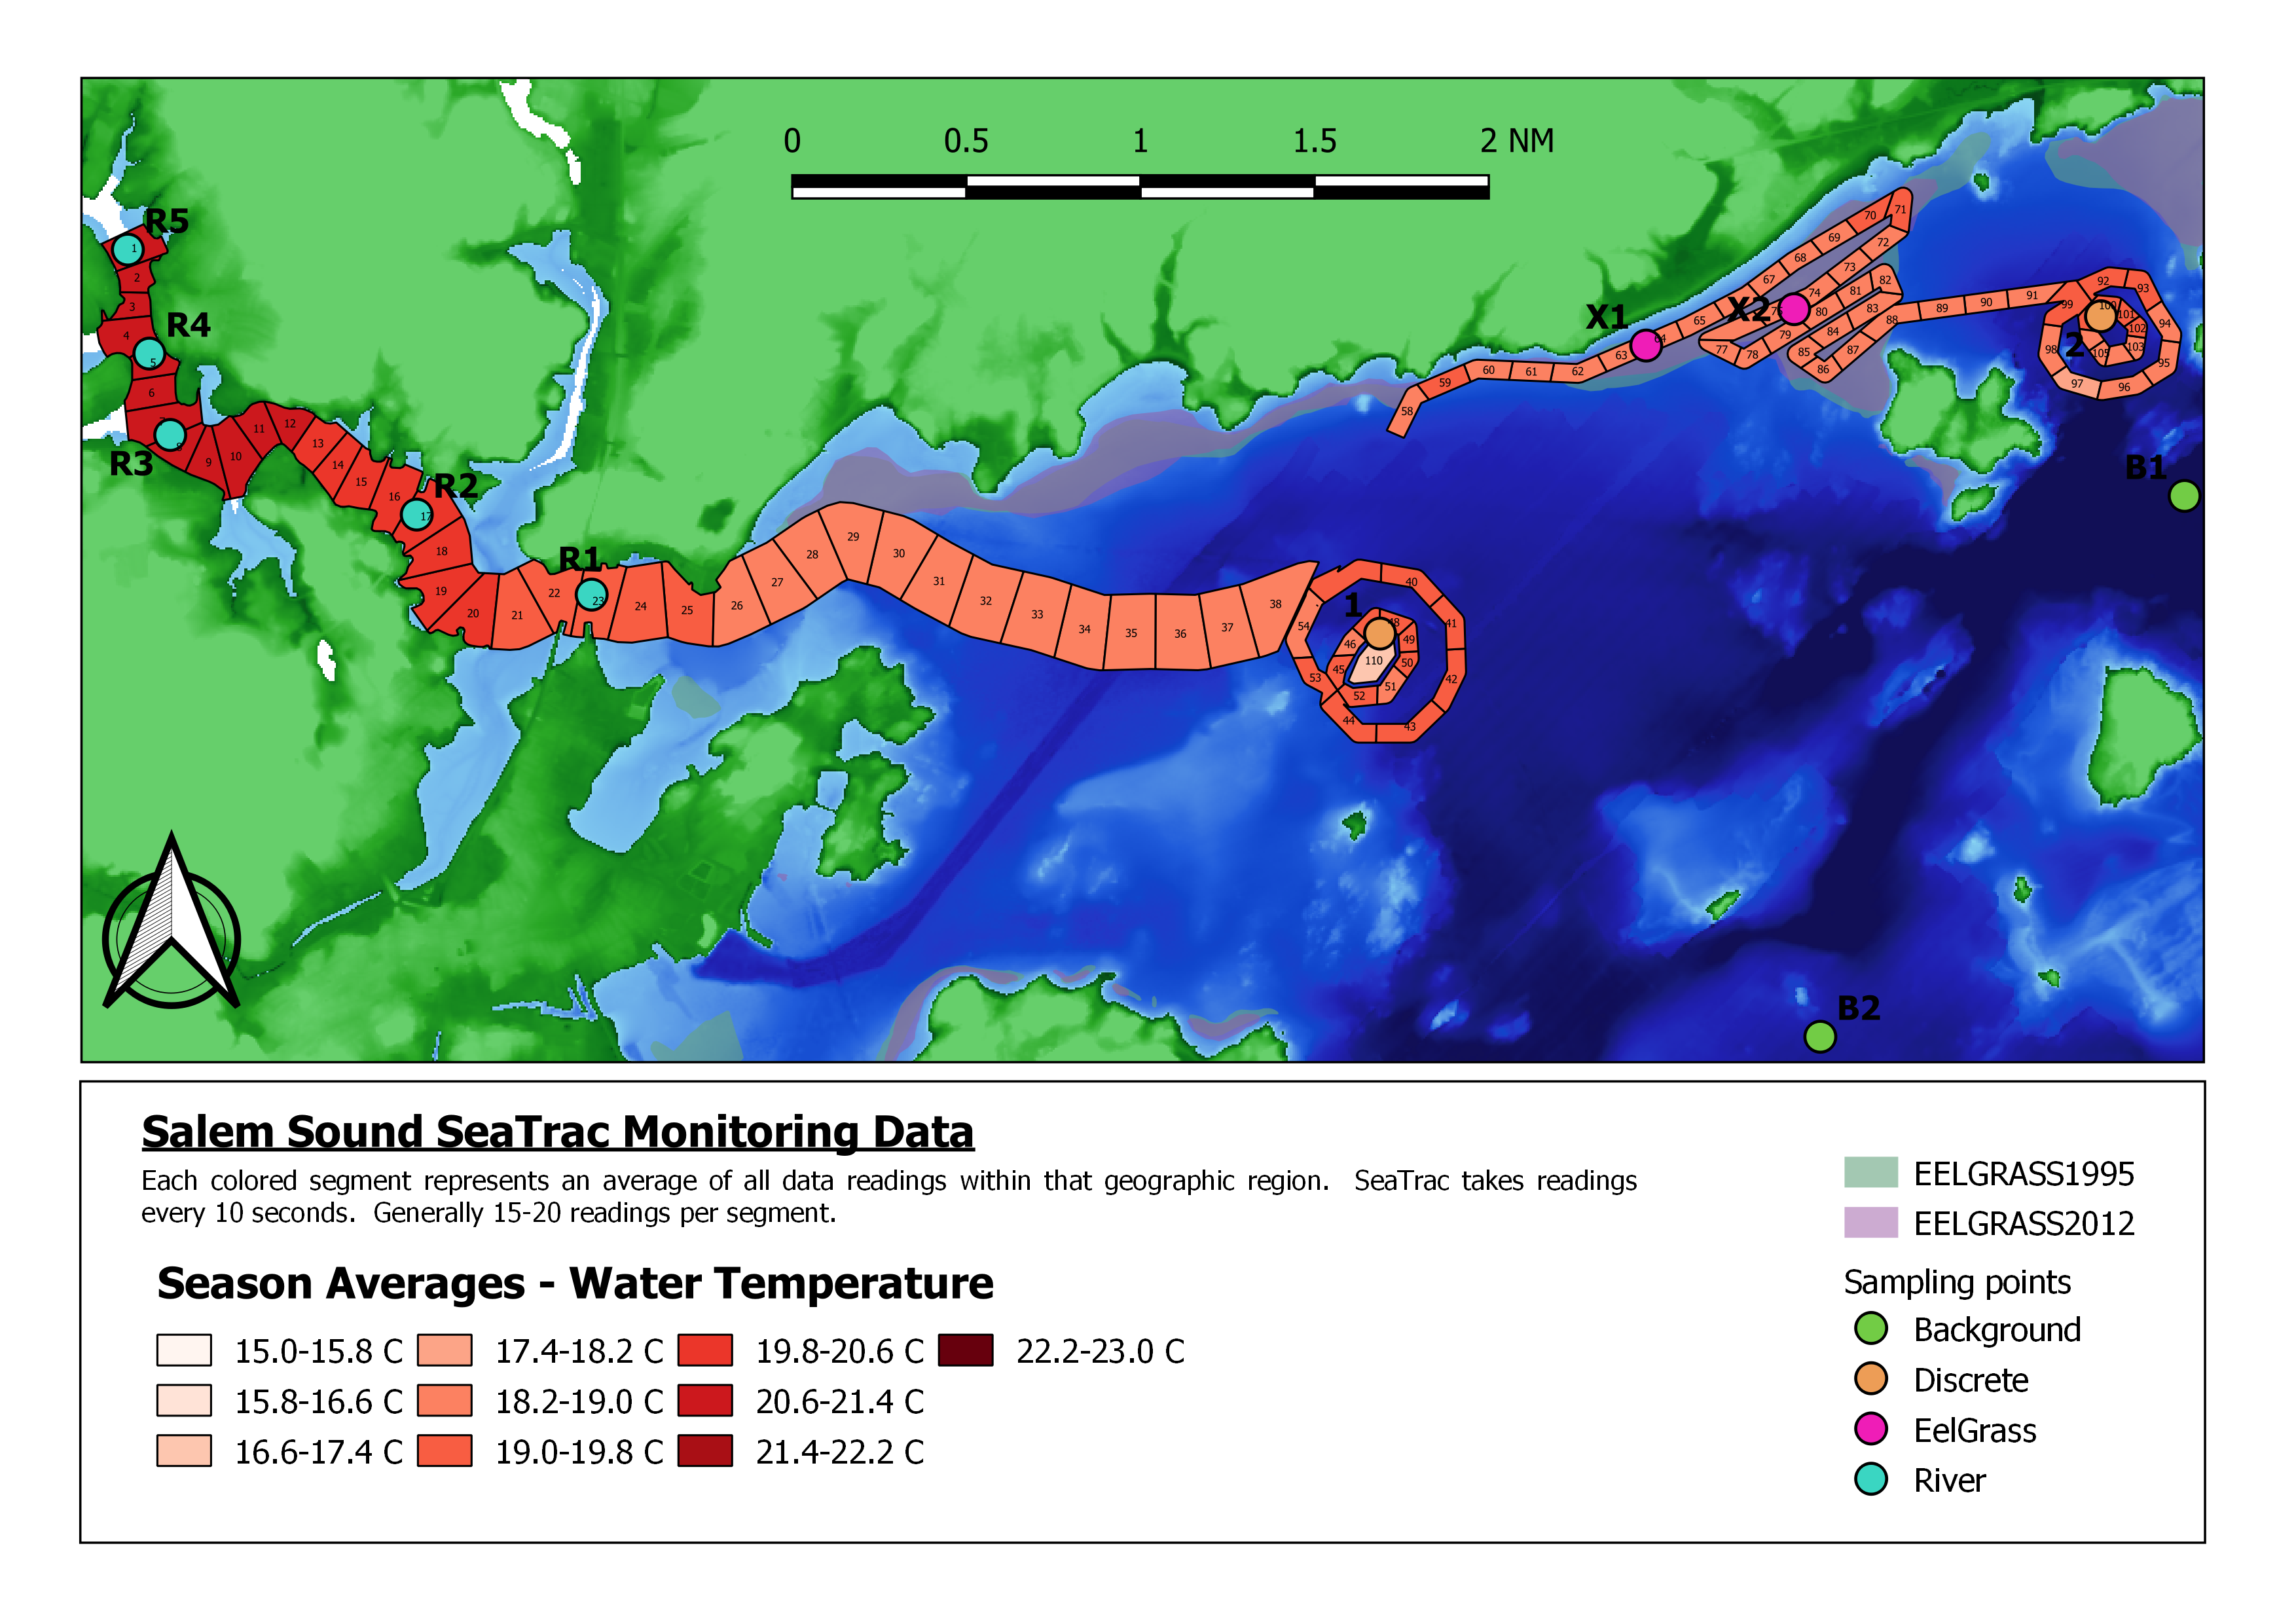 GIS analysis of temperature transect